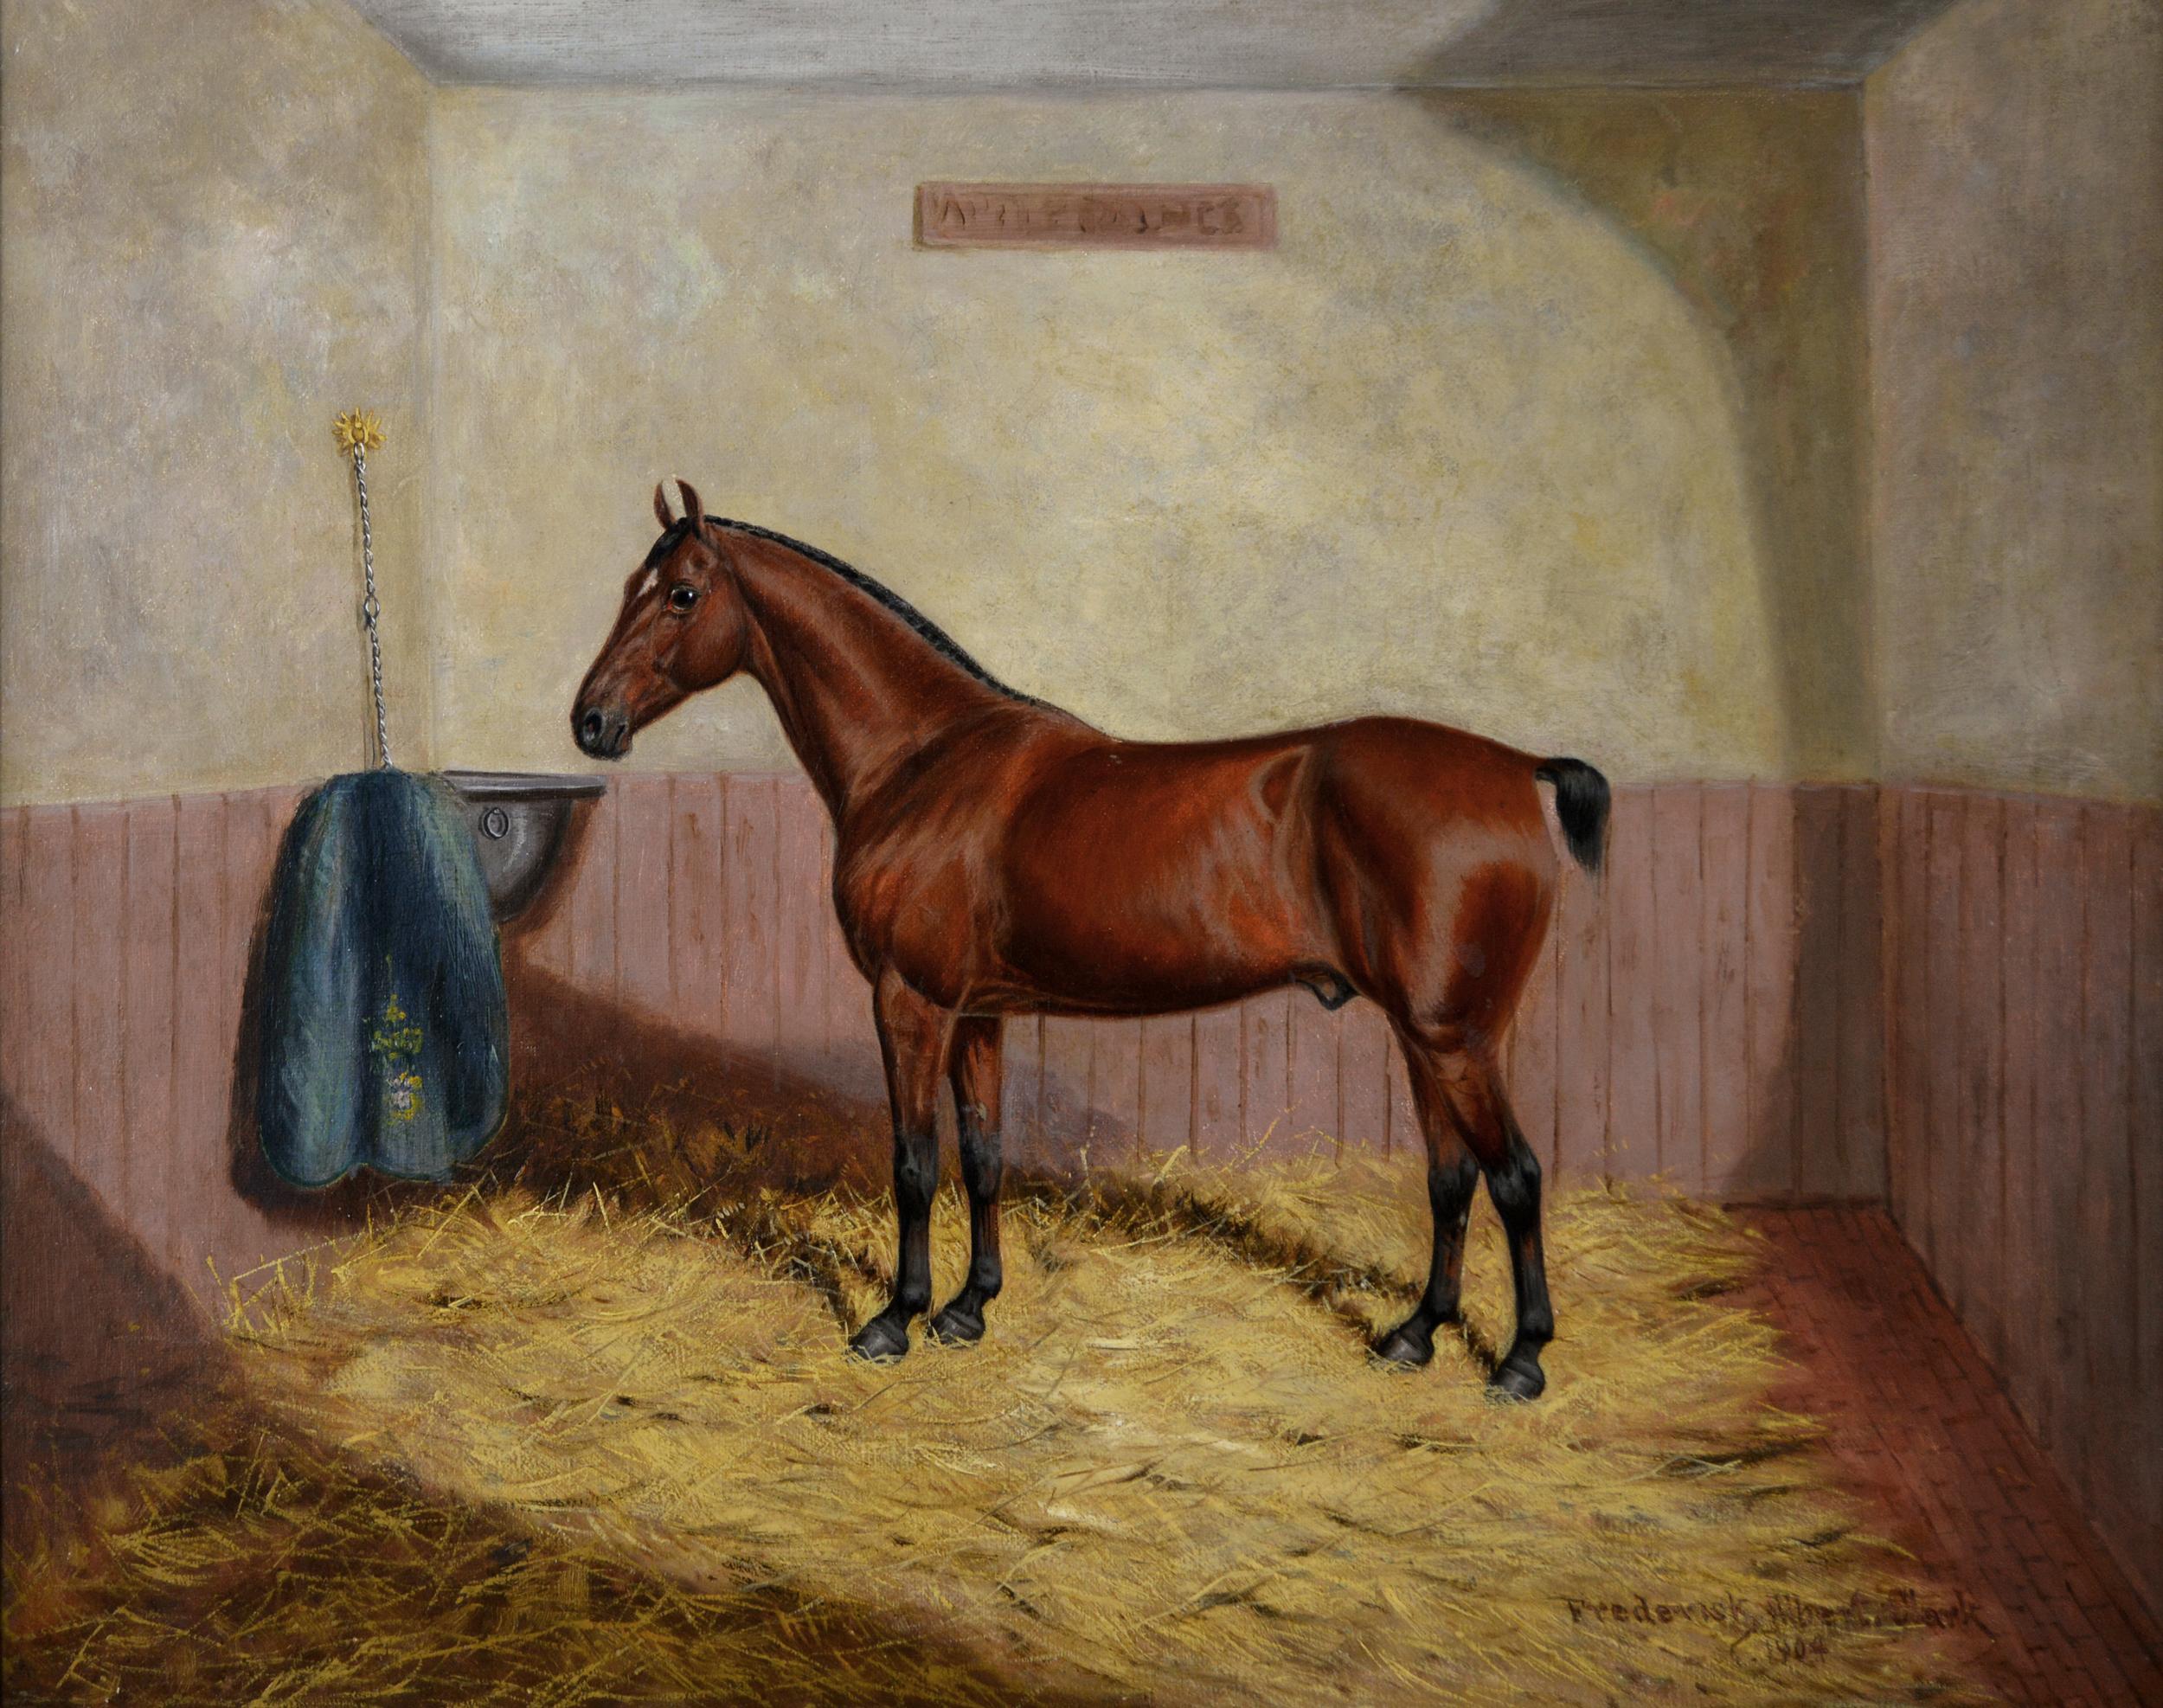 Late 19th Century oil painting of a horse in a stable - Painting by Frederick Albert Clark